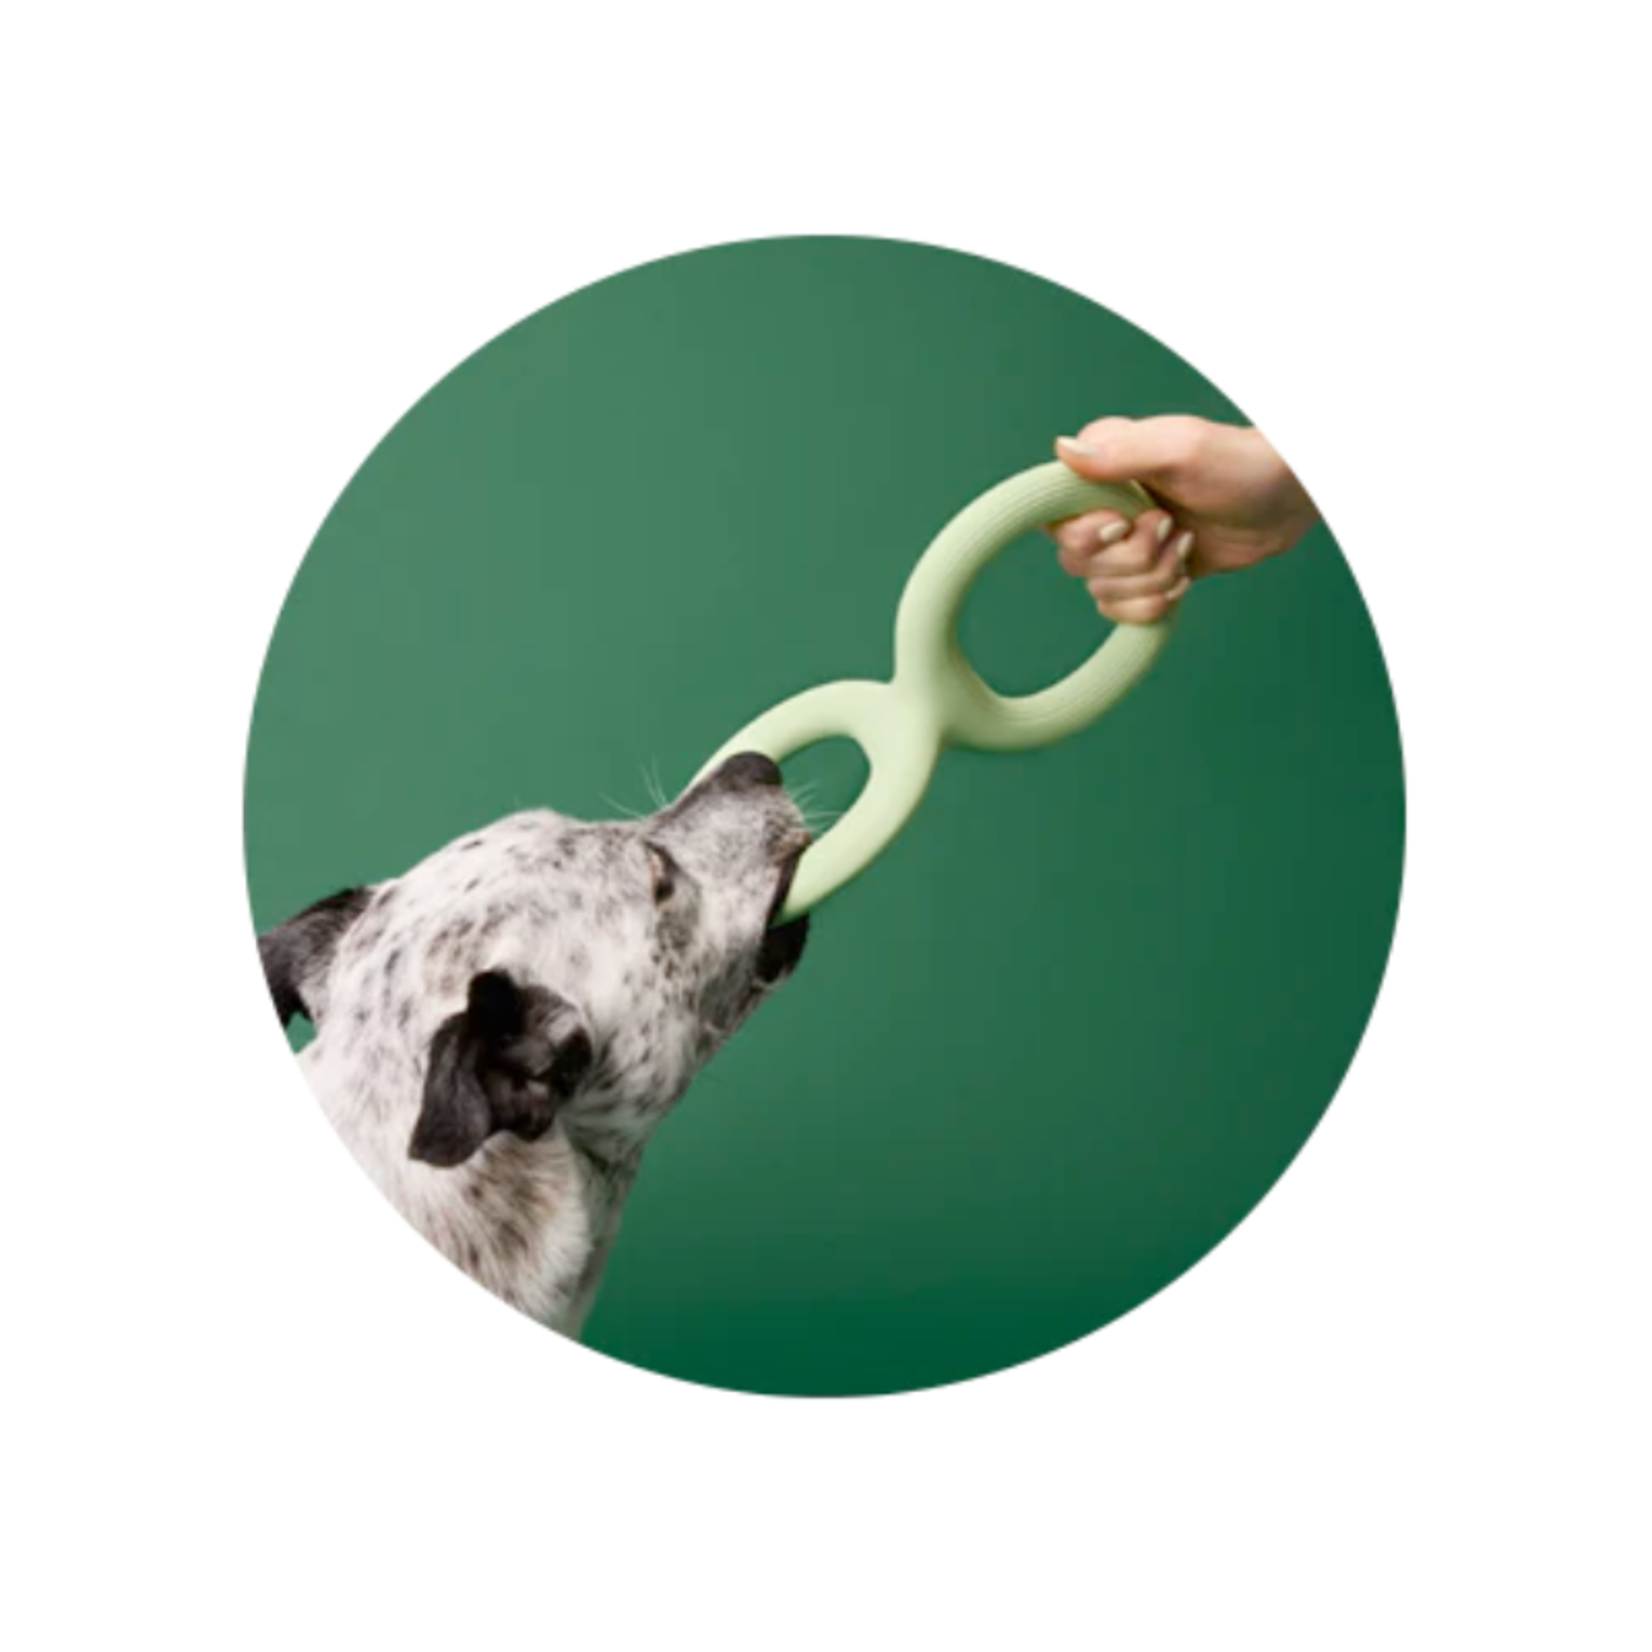 Earth Rated Tug Toy - Natural Rubber - Earth Rated